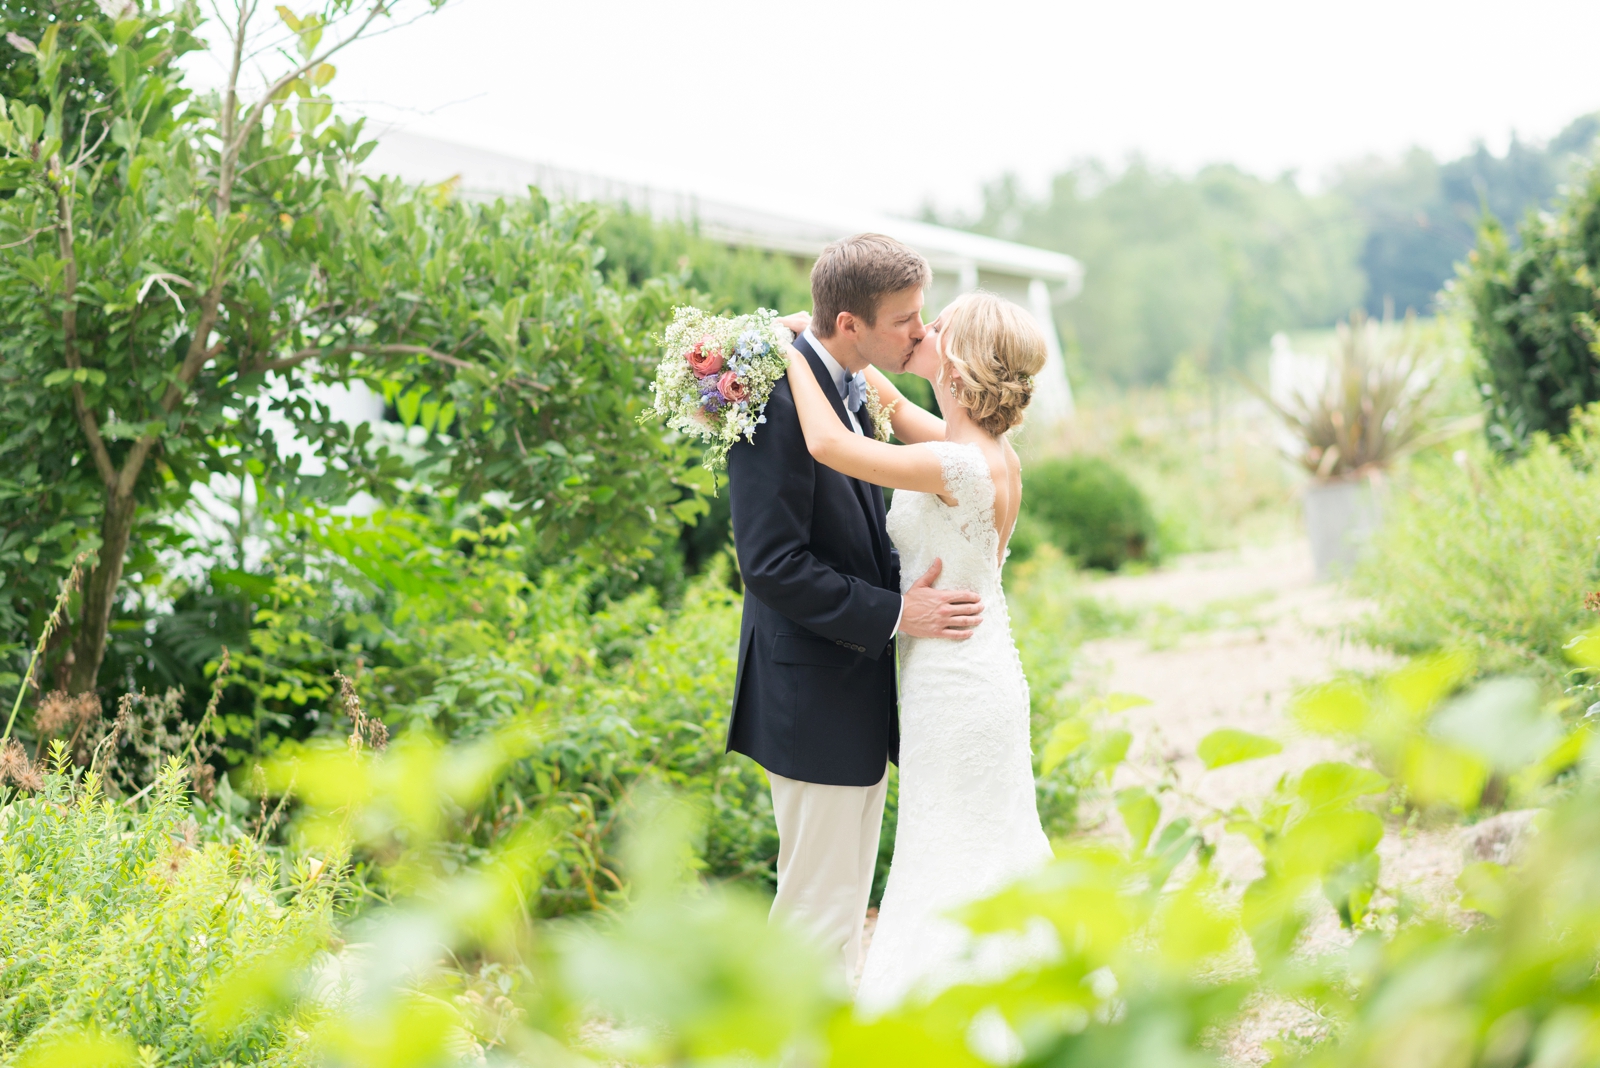 making-foreground-blurred-for-bride-and-groom-portraits